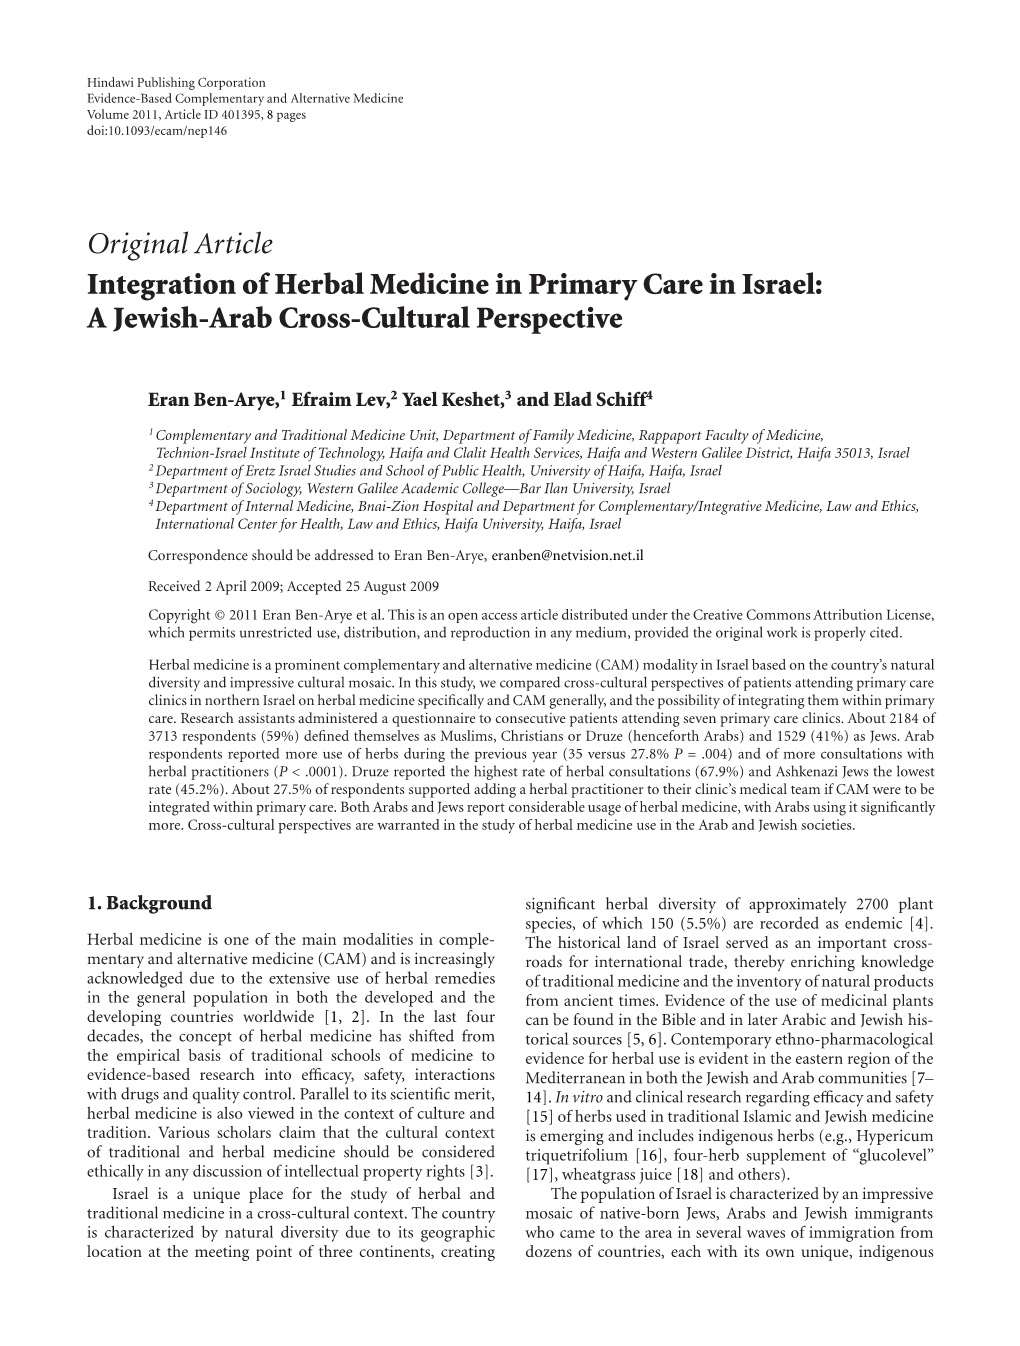 Integration of Herbal Medicine in Primary Care in Israel: a Jewish-Arab Cross-Cultural Perspective